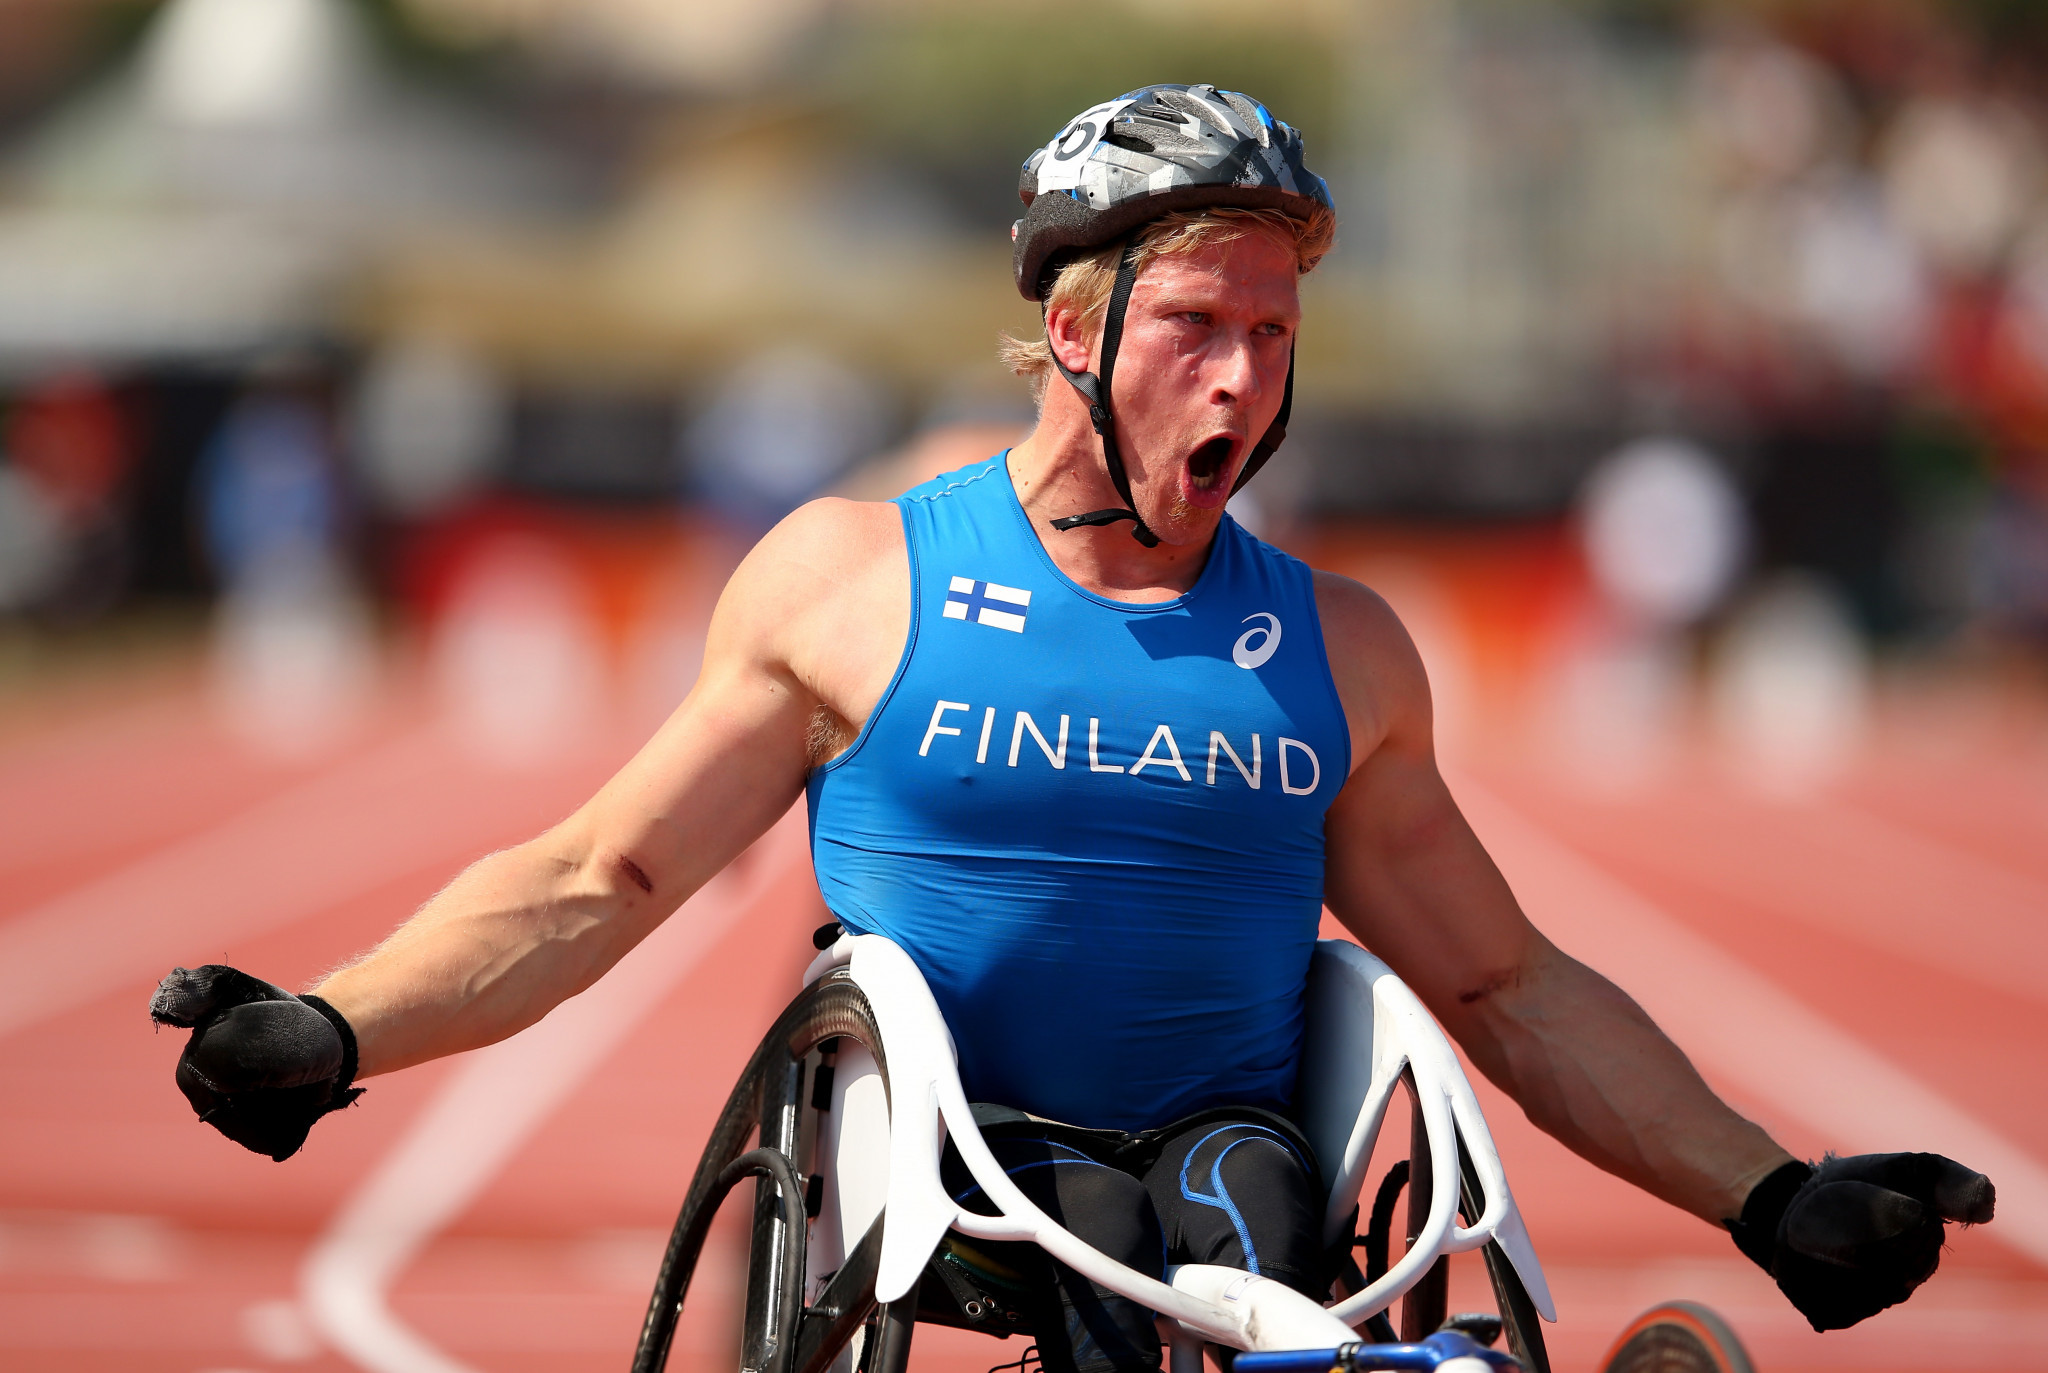 Finland’s five-time Paralympic champion Leo Pekka Tahti powered home to gold in the 100m T54 ©Getty Images